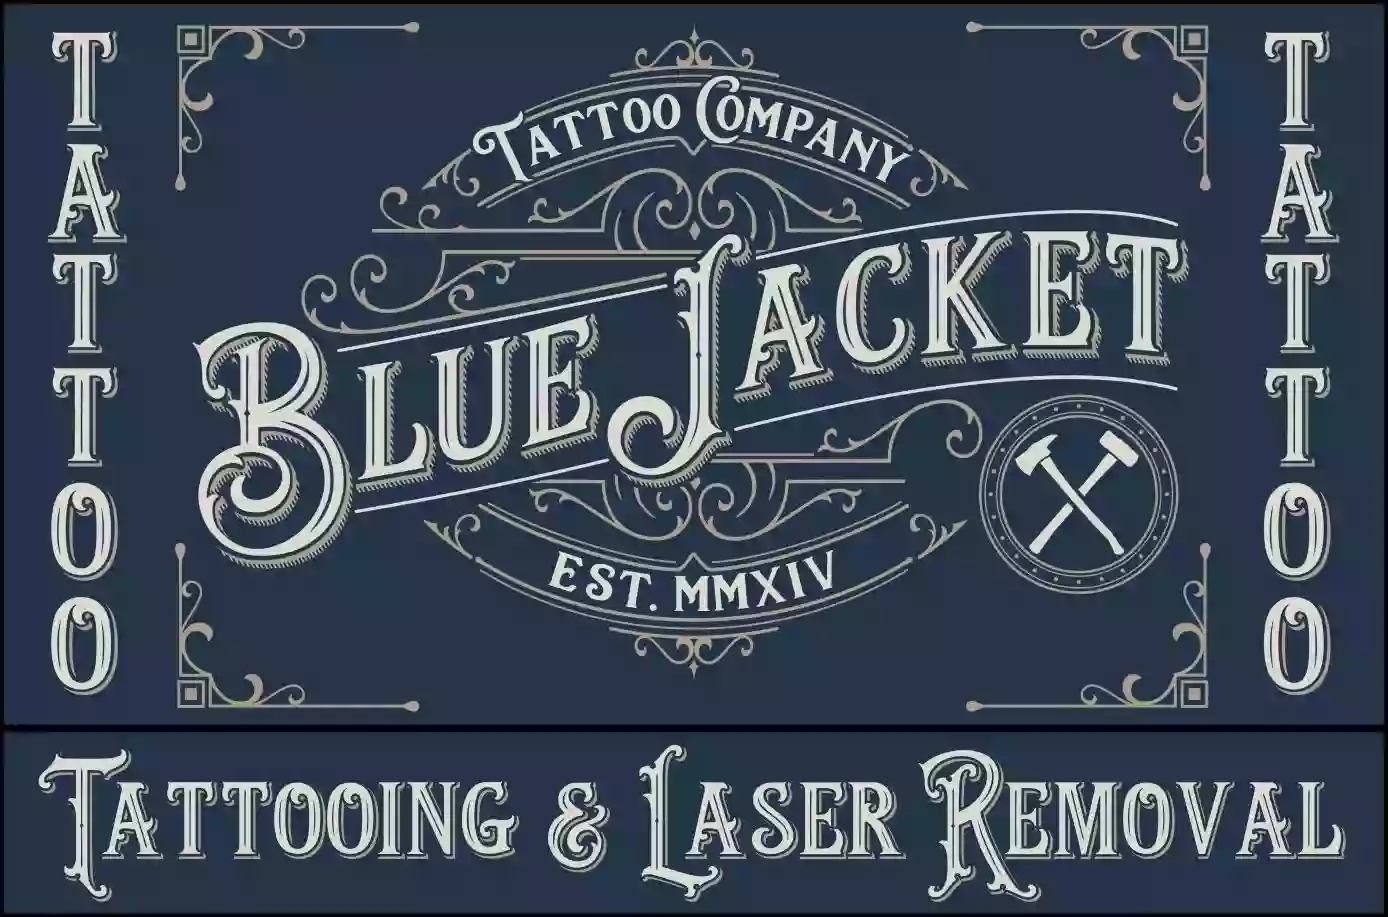 Blue Jacket Tattoo Company and Laser Removal